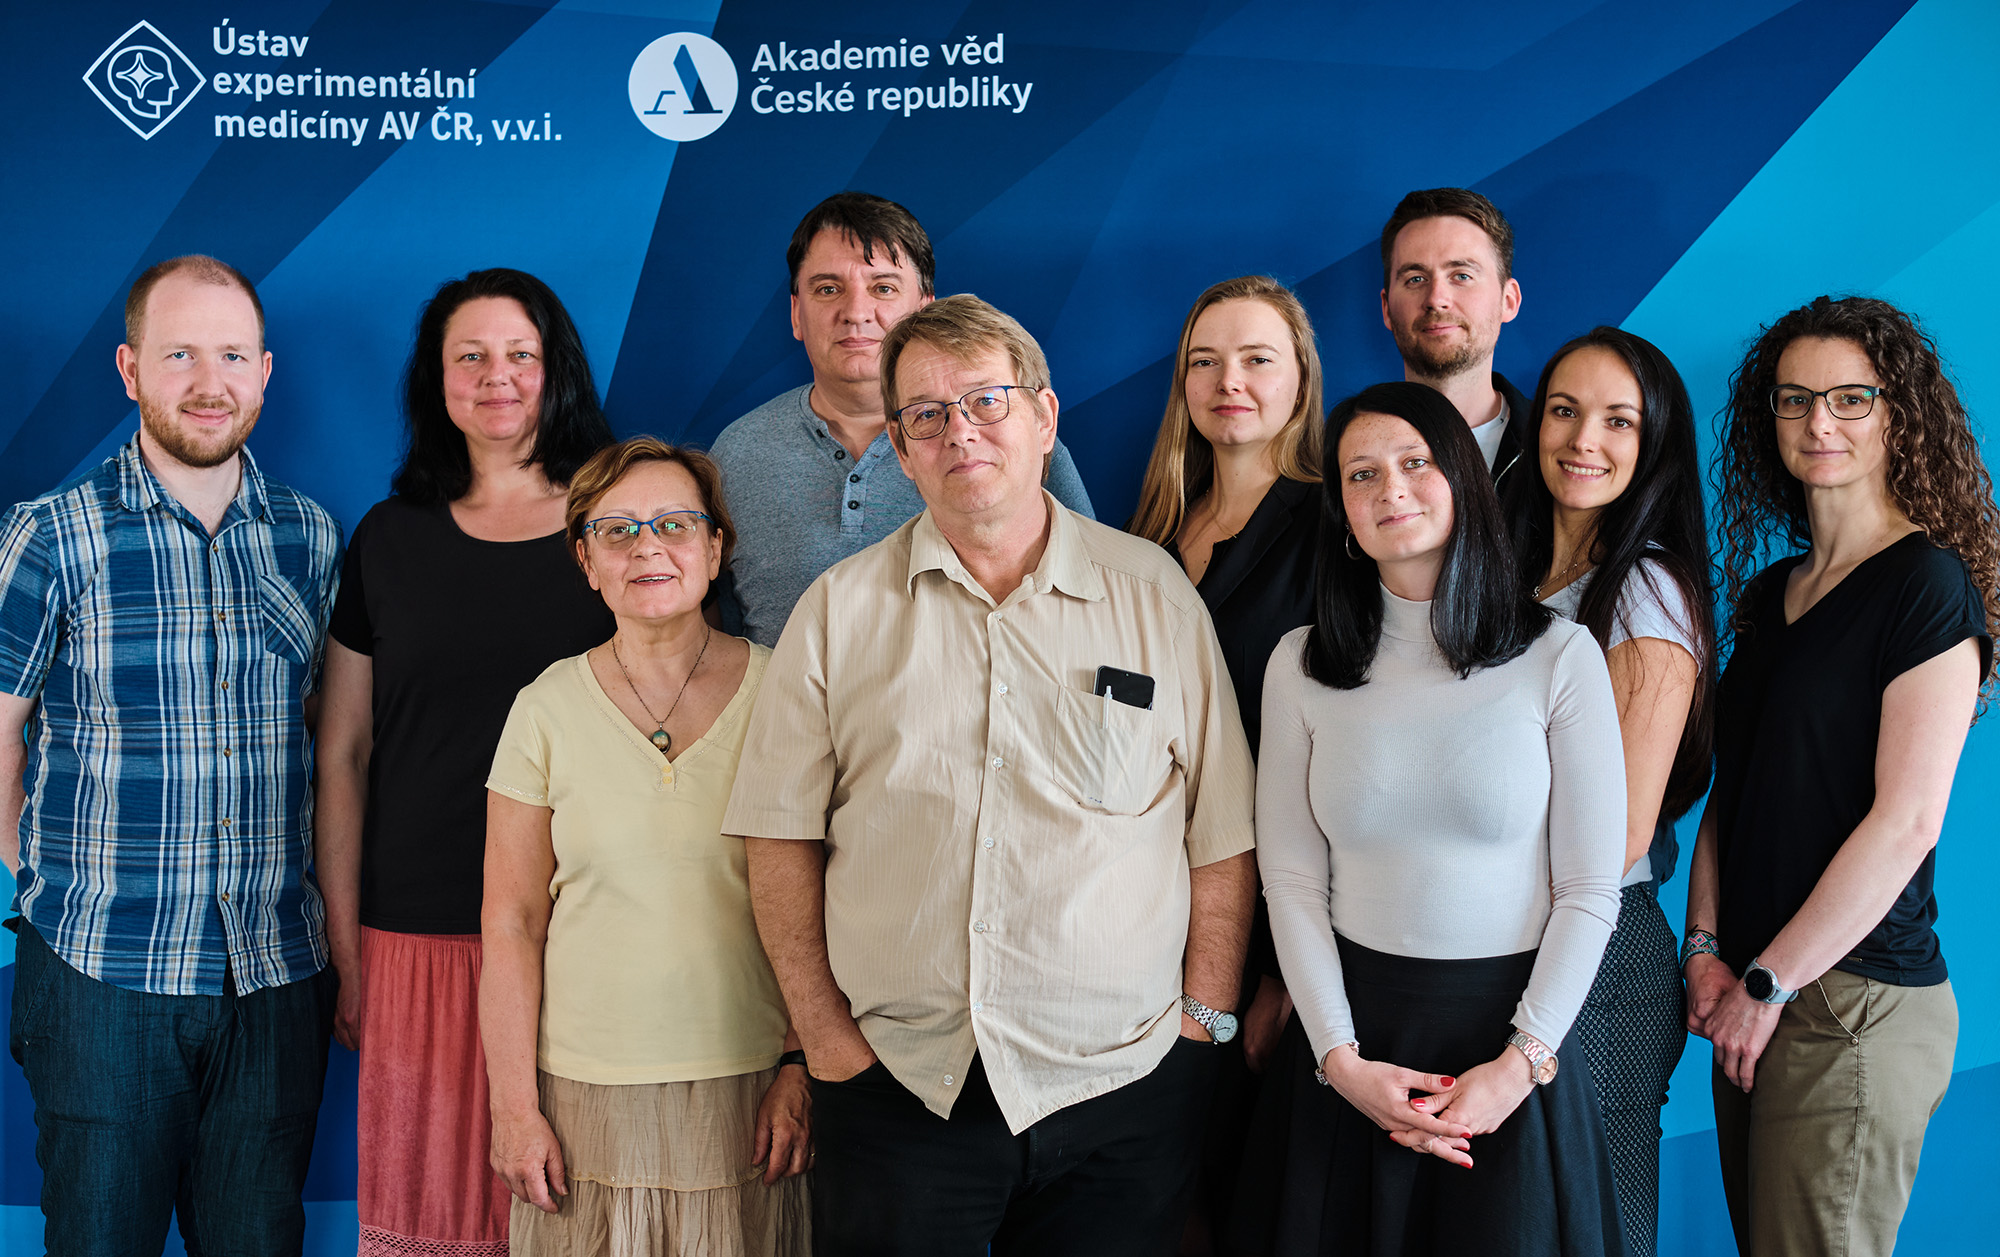 Group photo of the Department of the Molecular Biology of Cancer team